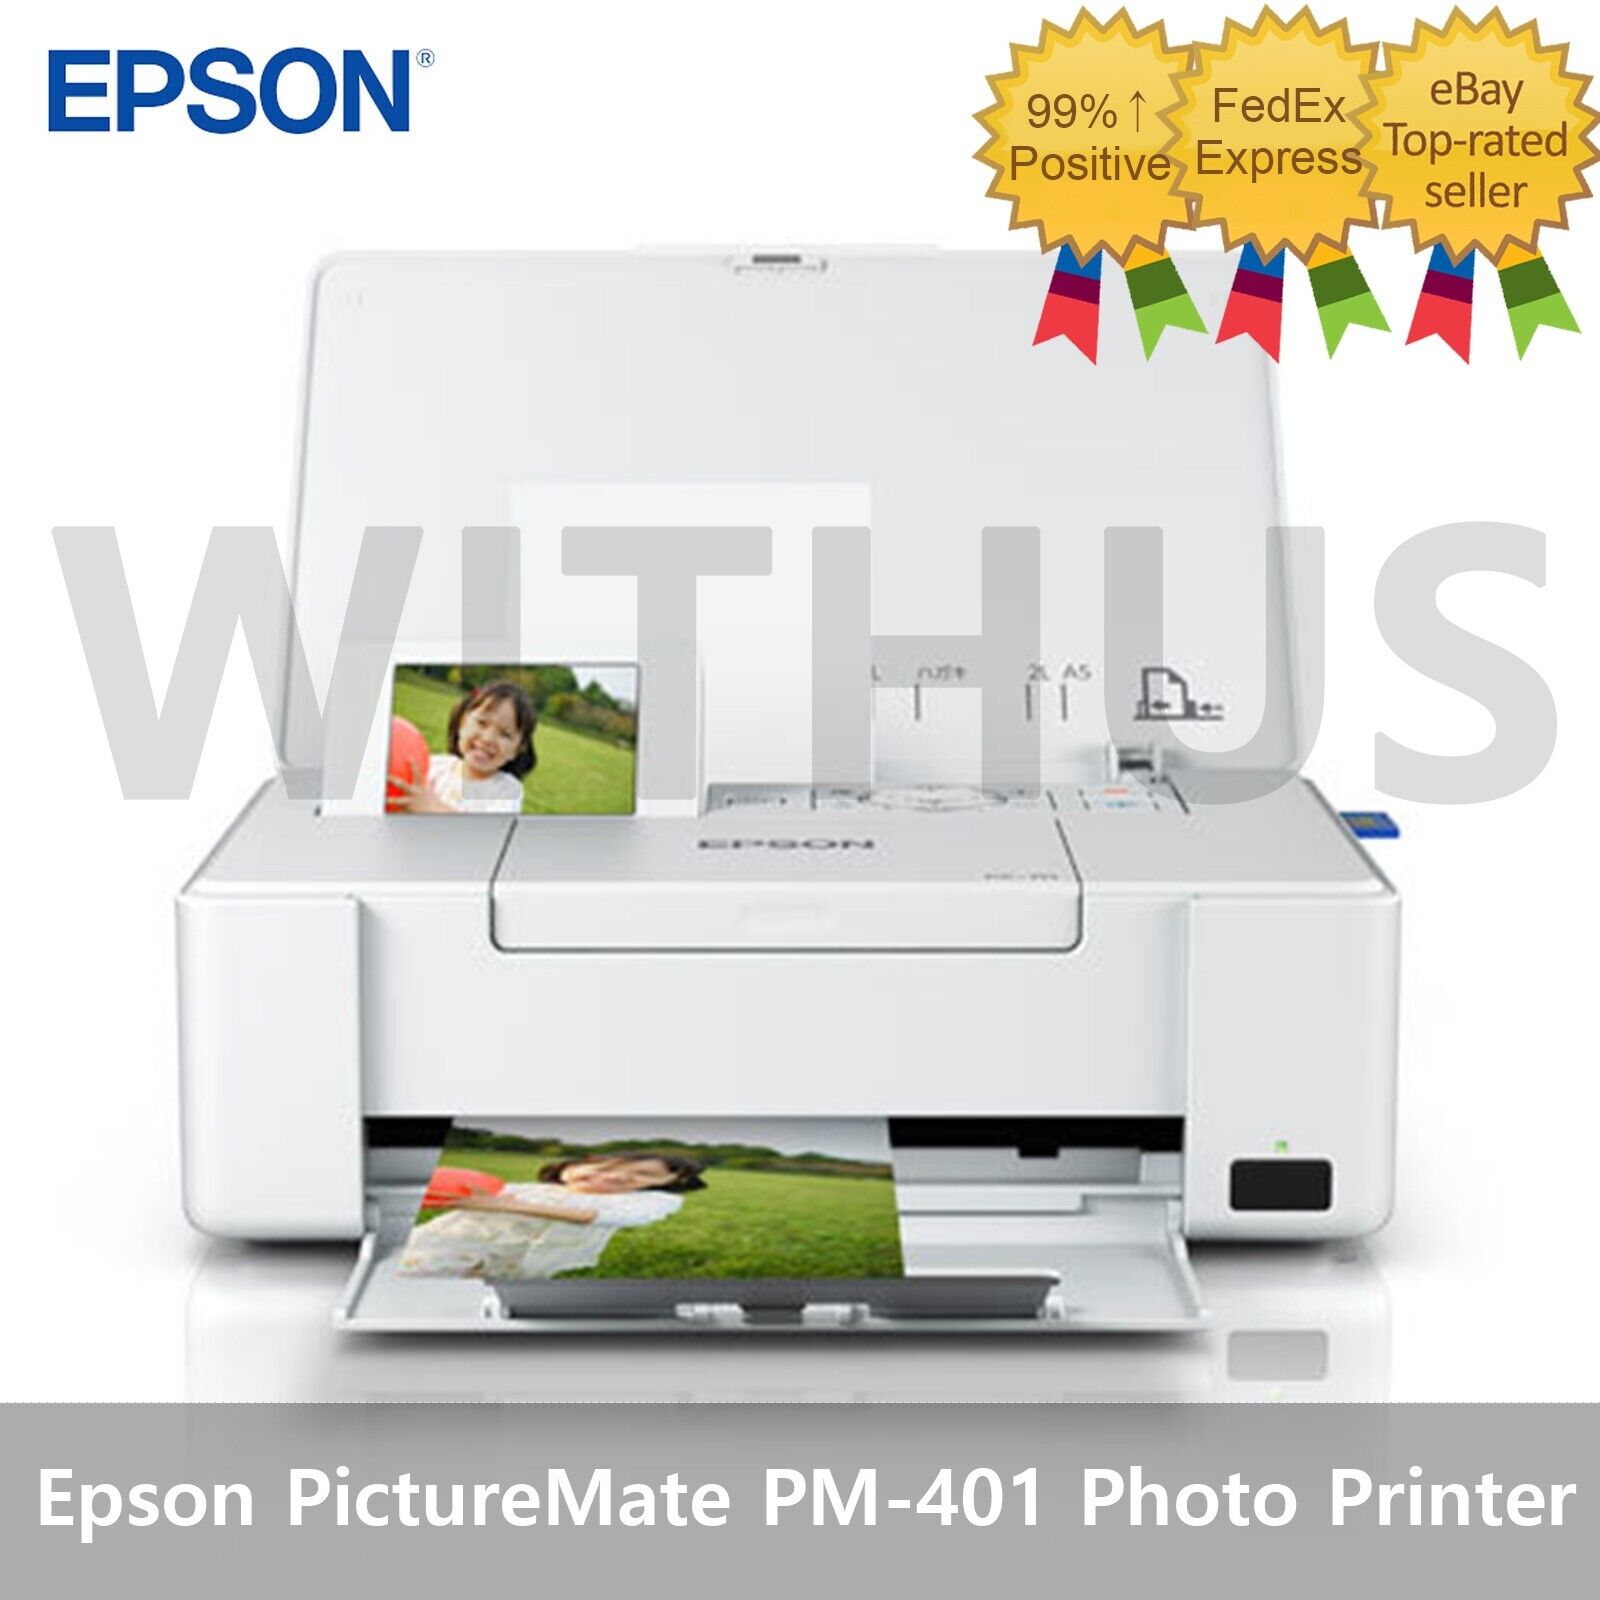 EPSON PictureMate PM-401 (Next of PM-400) Ultra Compact Photo Printer - Tracking